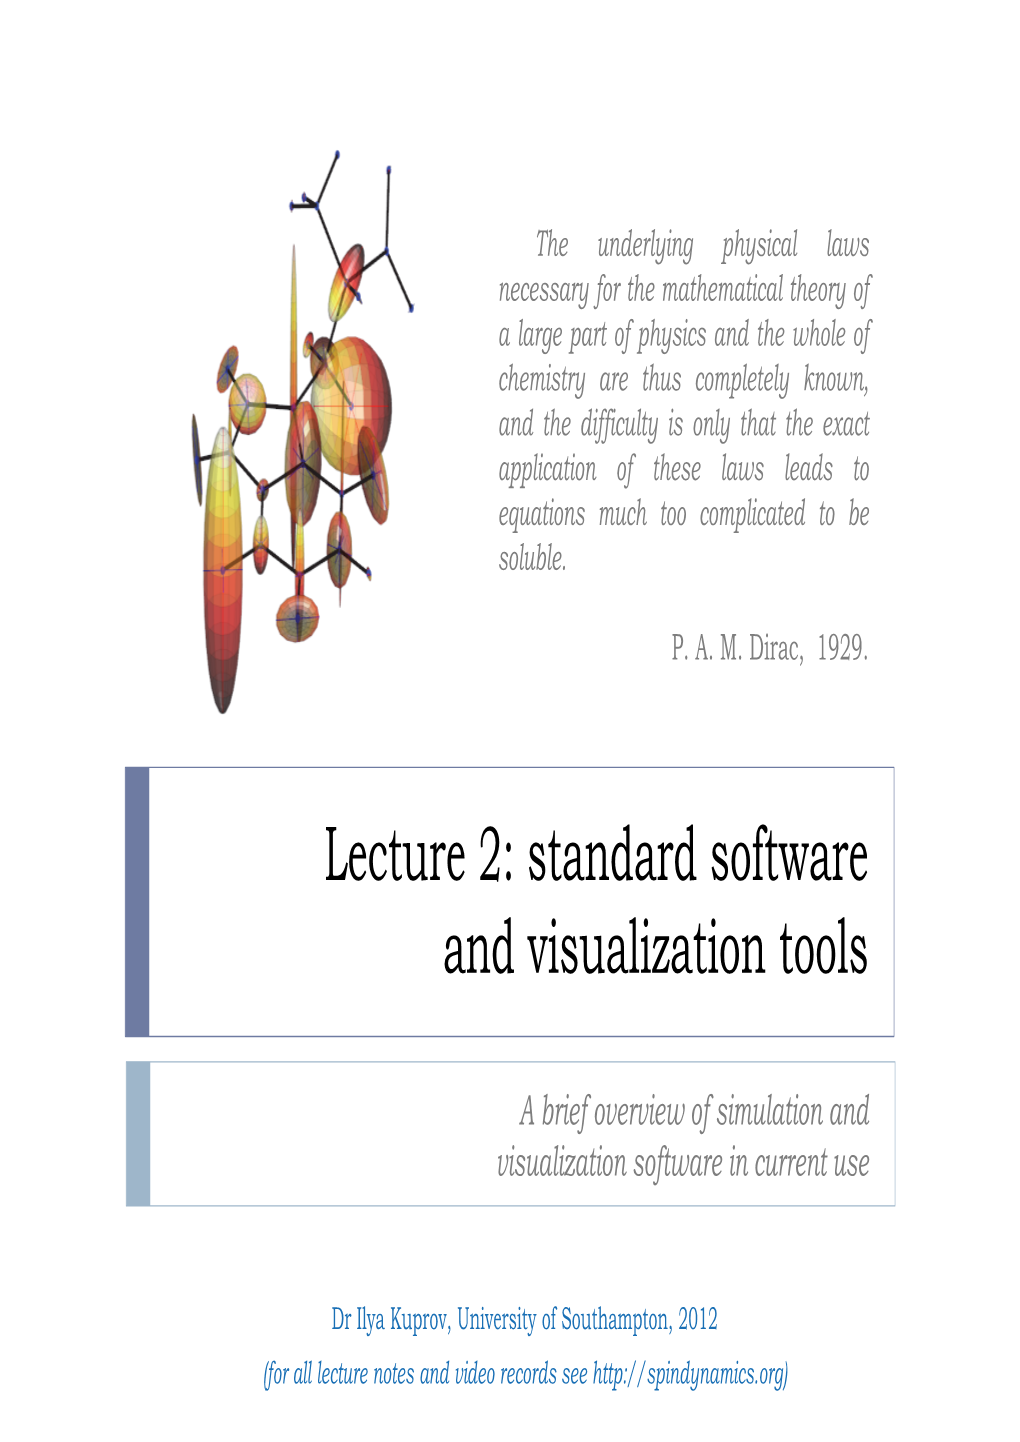 Lecture 2: Standard Software and Visualization Tools